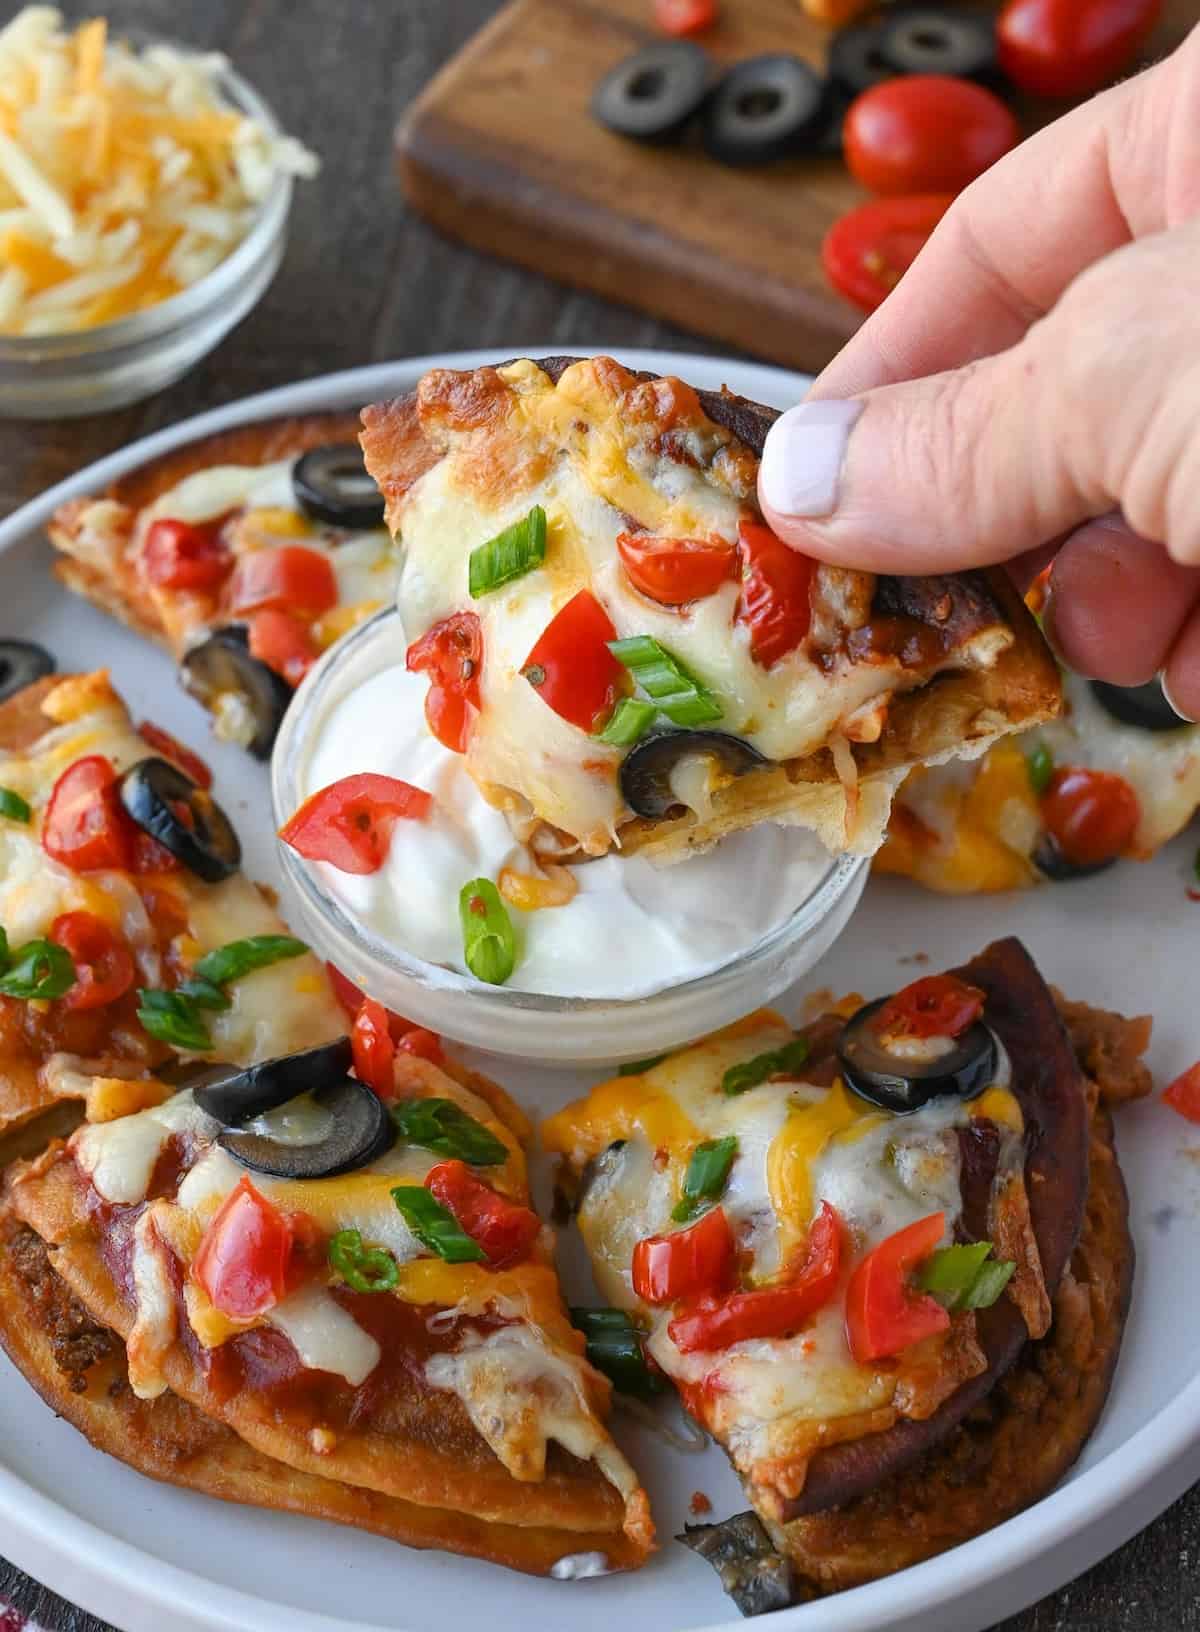 A slice of mexican pizza being dipped into sour cream.